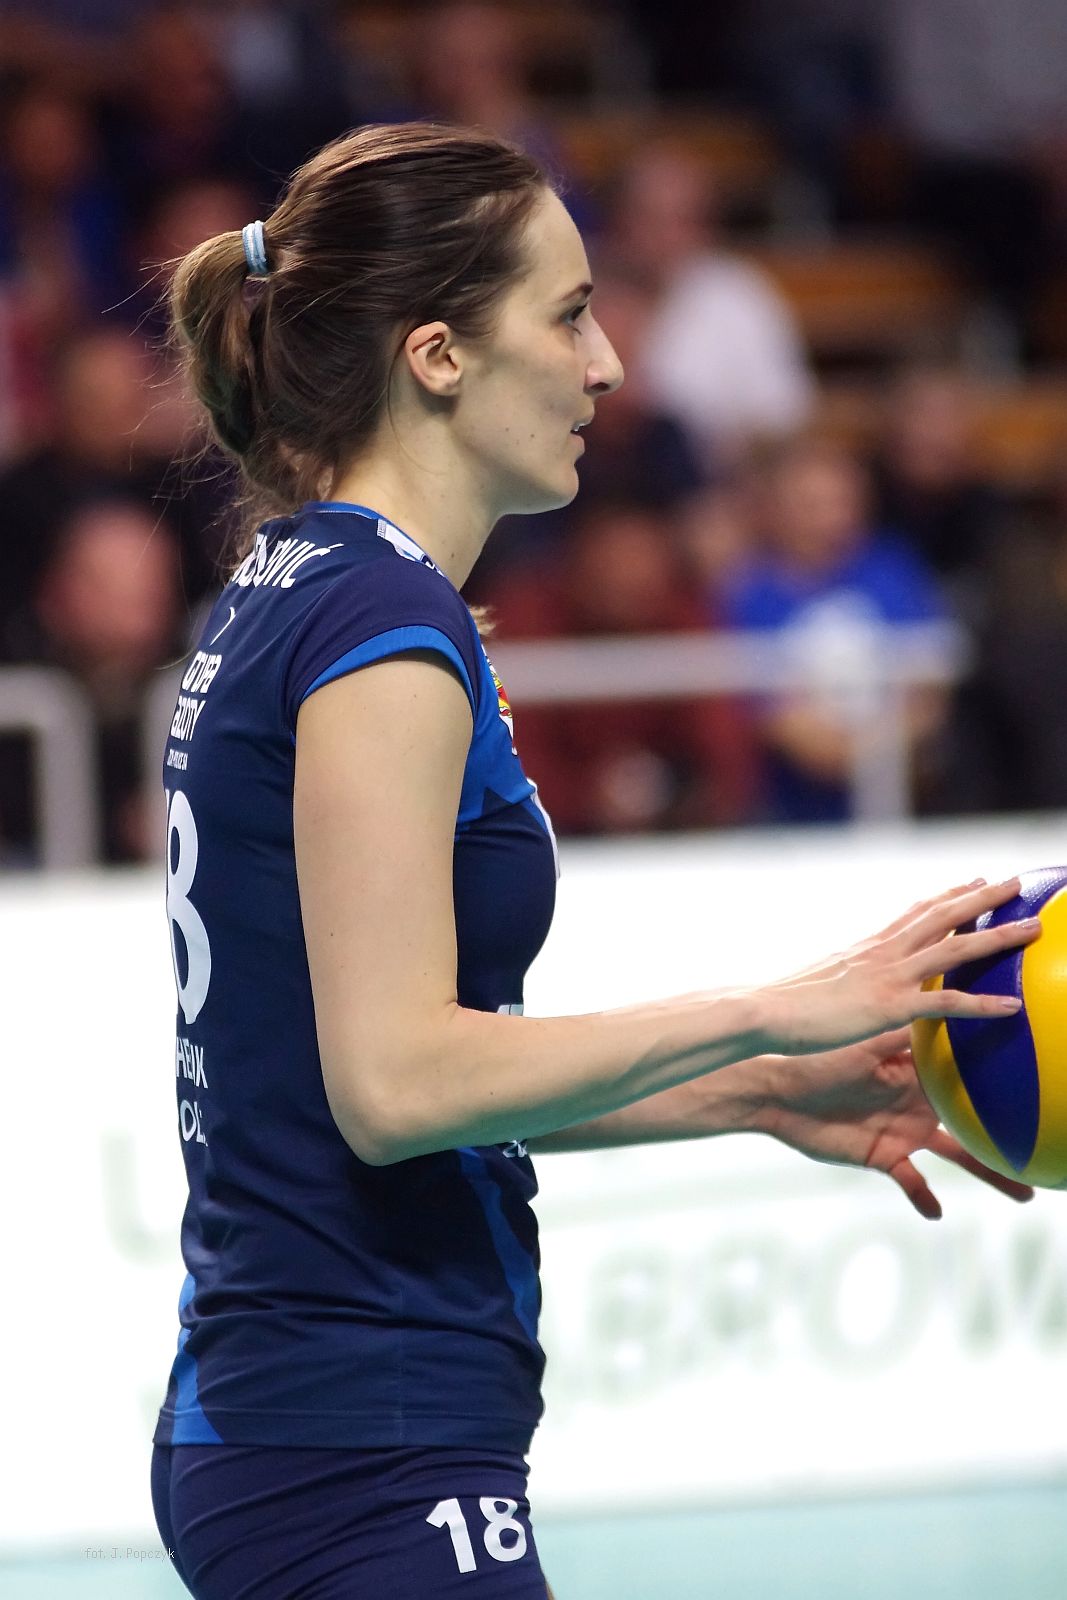 a woman wearing a blue uniform holds a yellow and blue volleyball ball